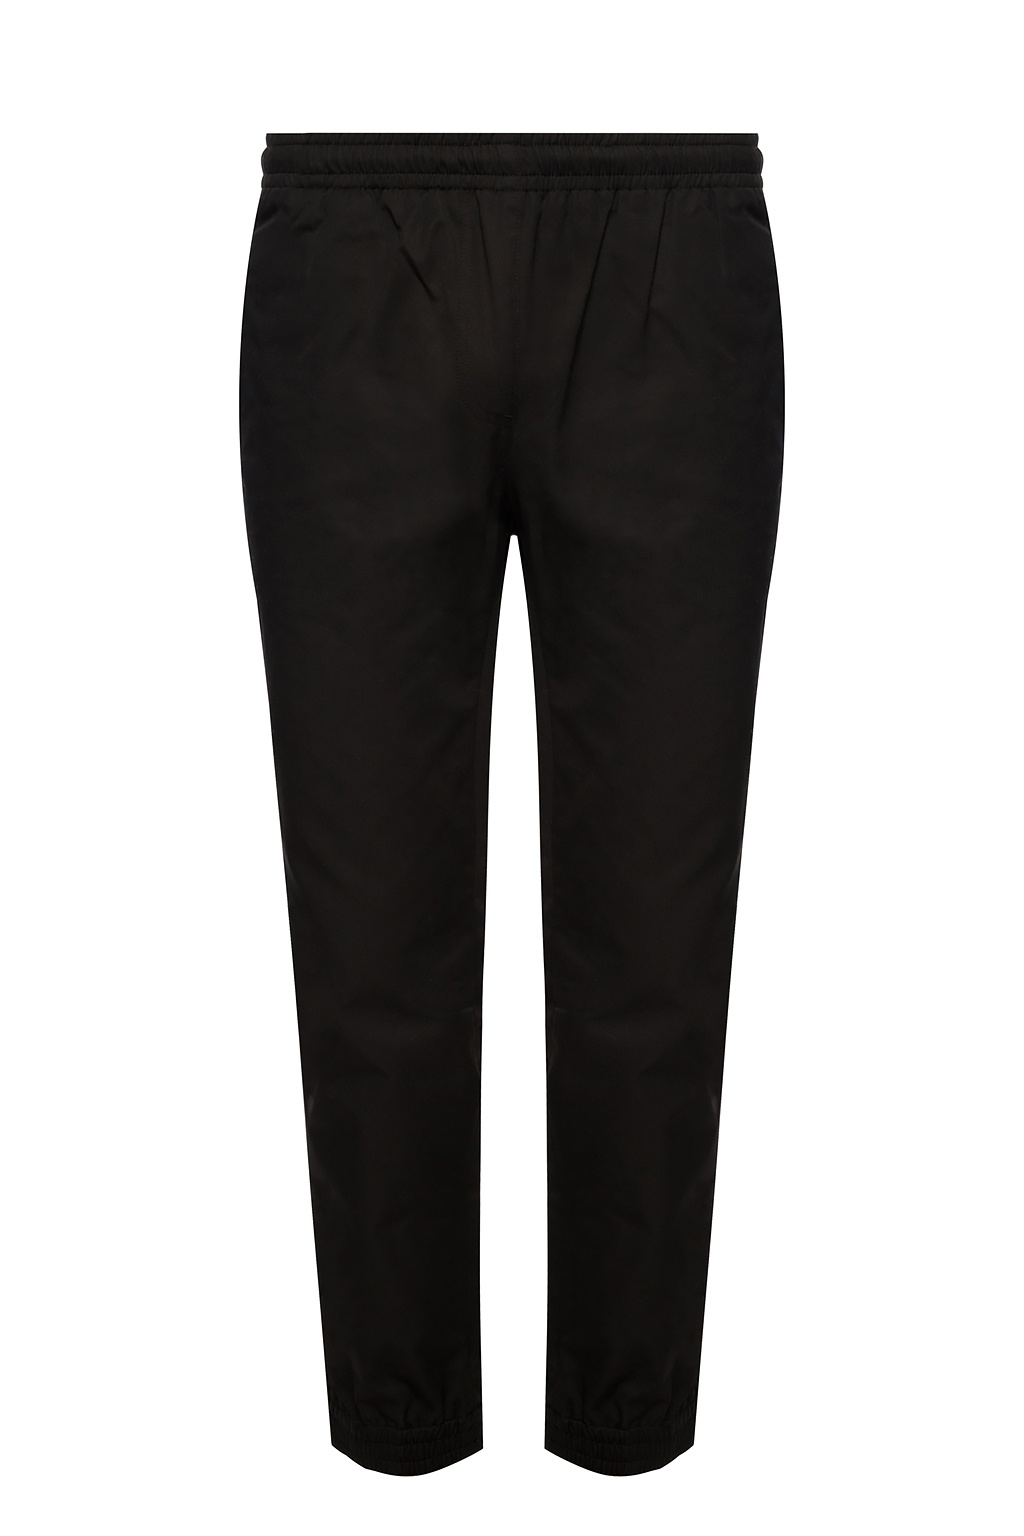 Versace Logo-embroidered trousers | Men's Clothing | Vitkac